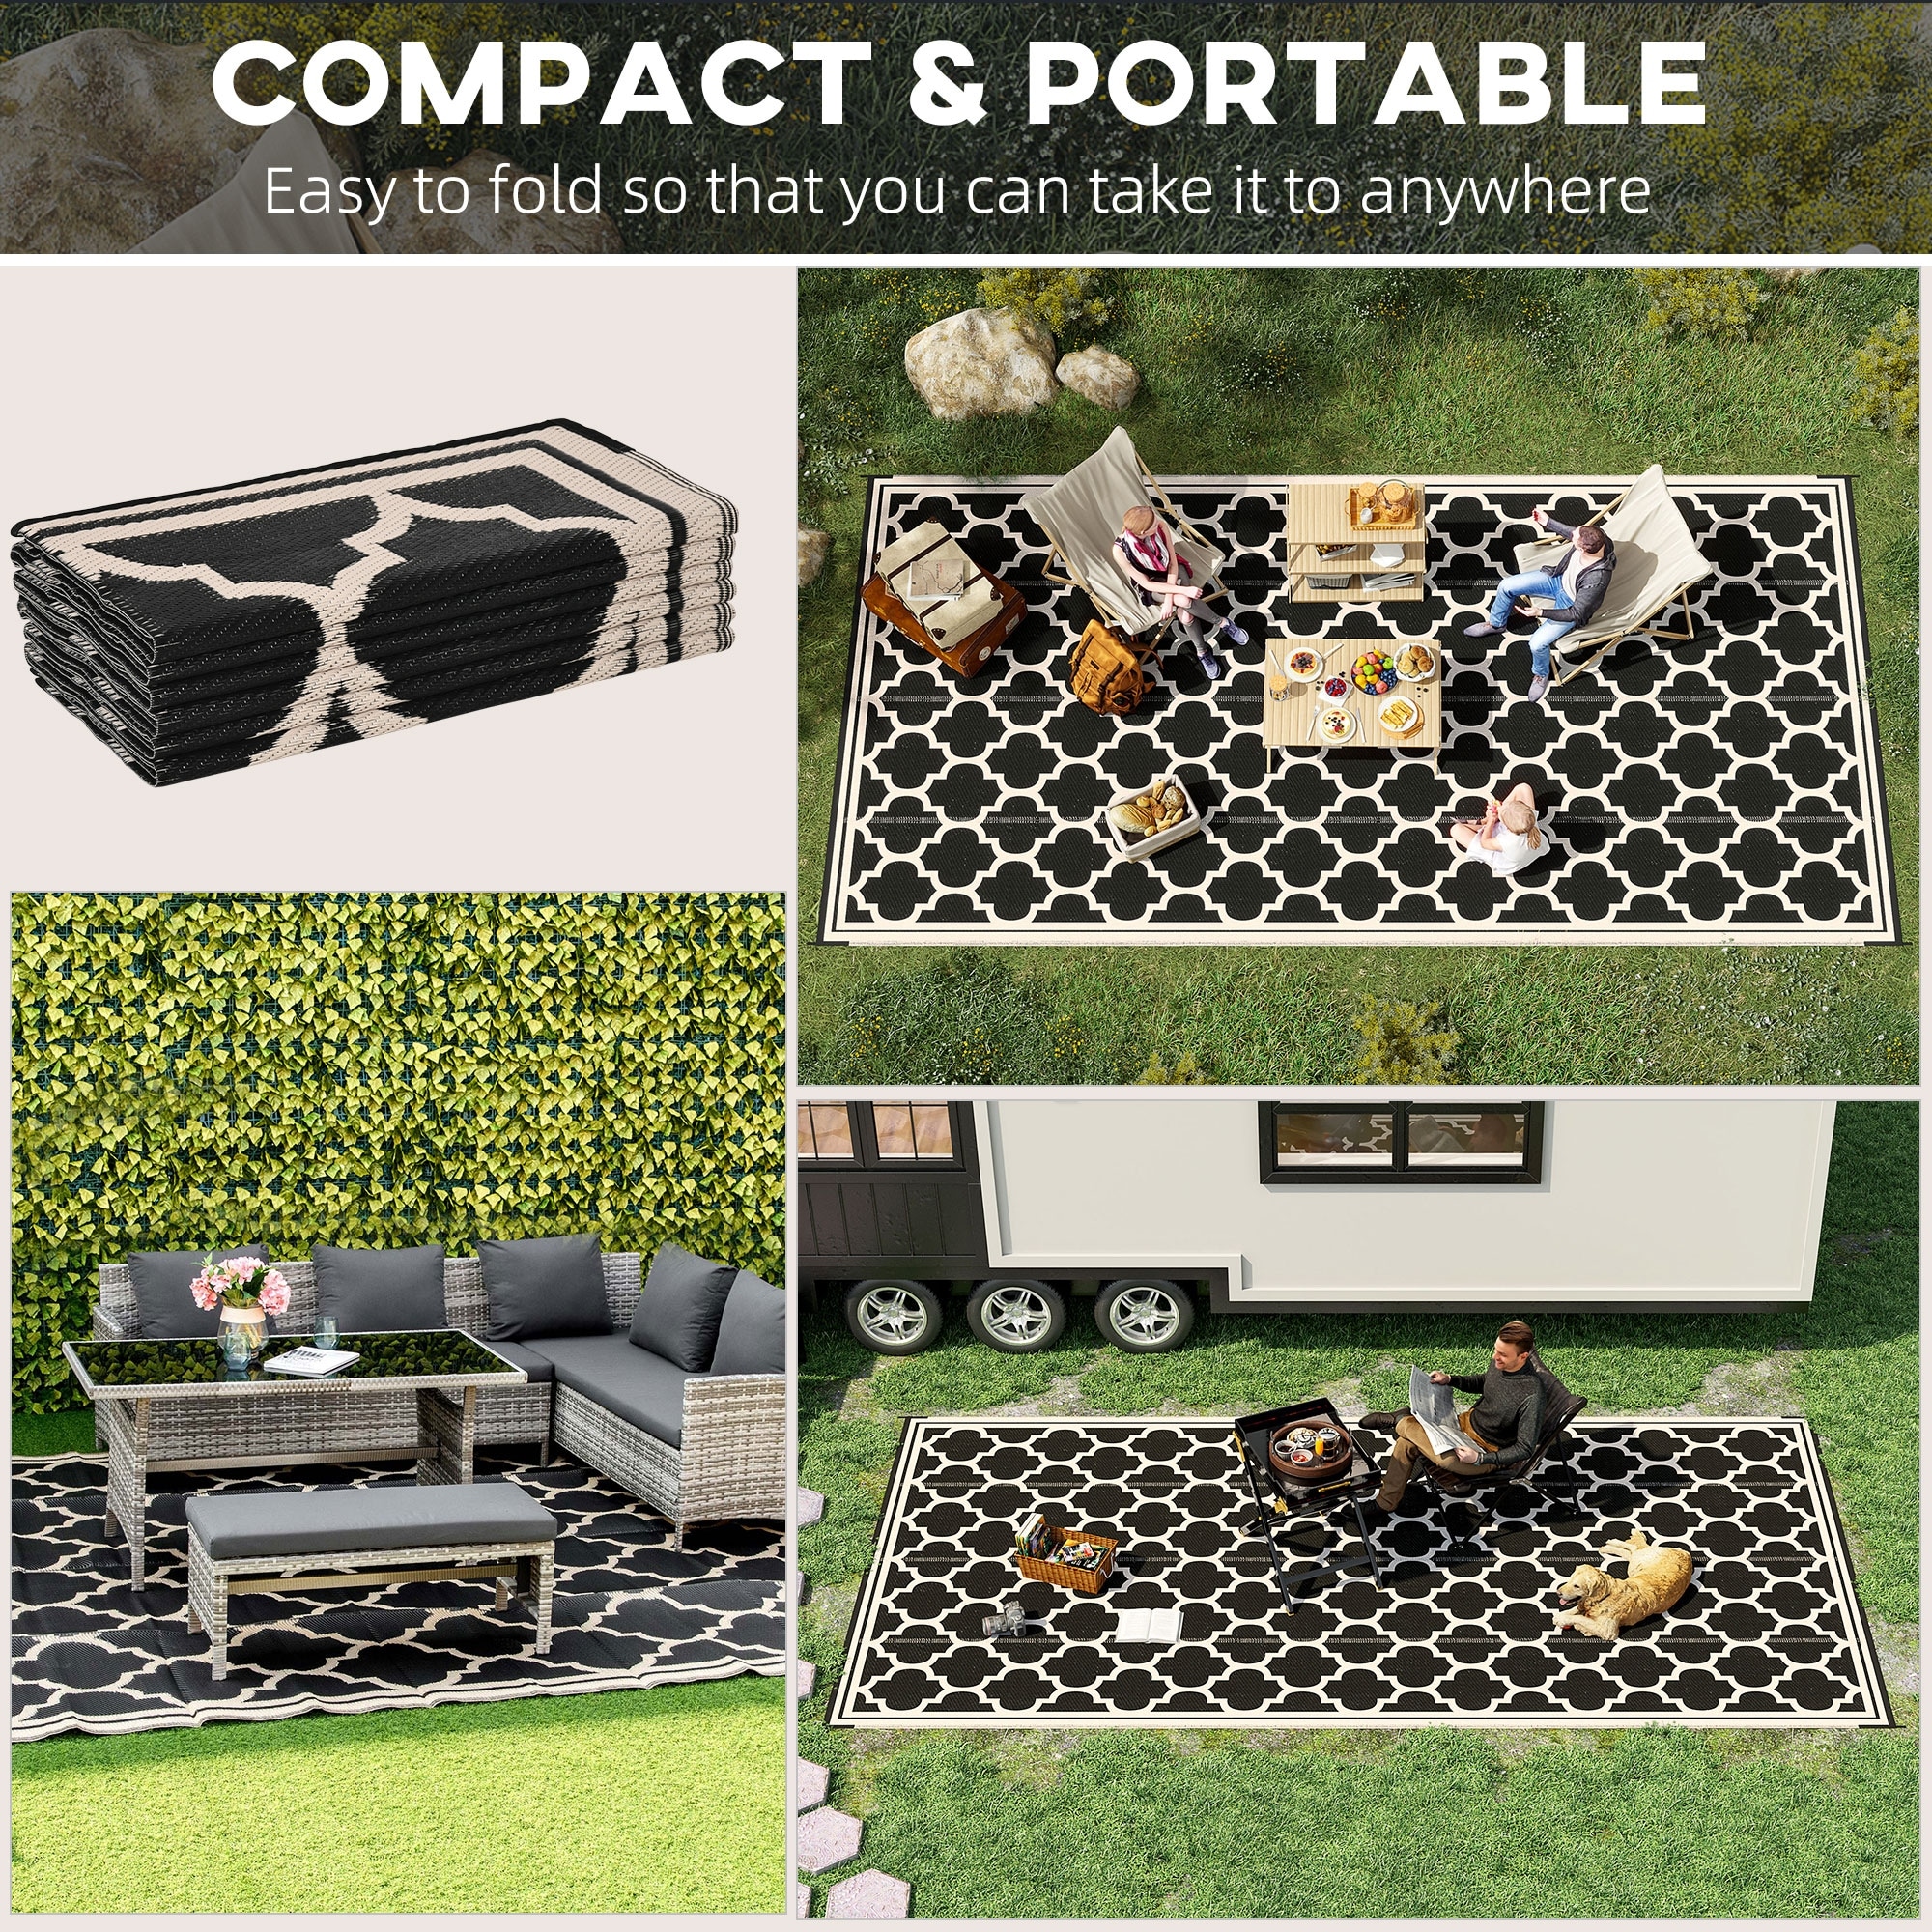 https://ak1.ostkcdn.com/images/products/is/images/direct/bdc769180fdb39bb4231bcae547393a0414c0fcf/Outsunny-Reversible-Outdoor-RV-Rug%2C-Patio-Floor-Mat%2C-Plastic-Straw-Rug-for-Backyard%2C-Deck%2C-Picnic%2C-Beach%2C-Camping.jpg